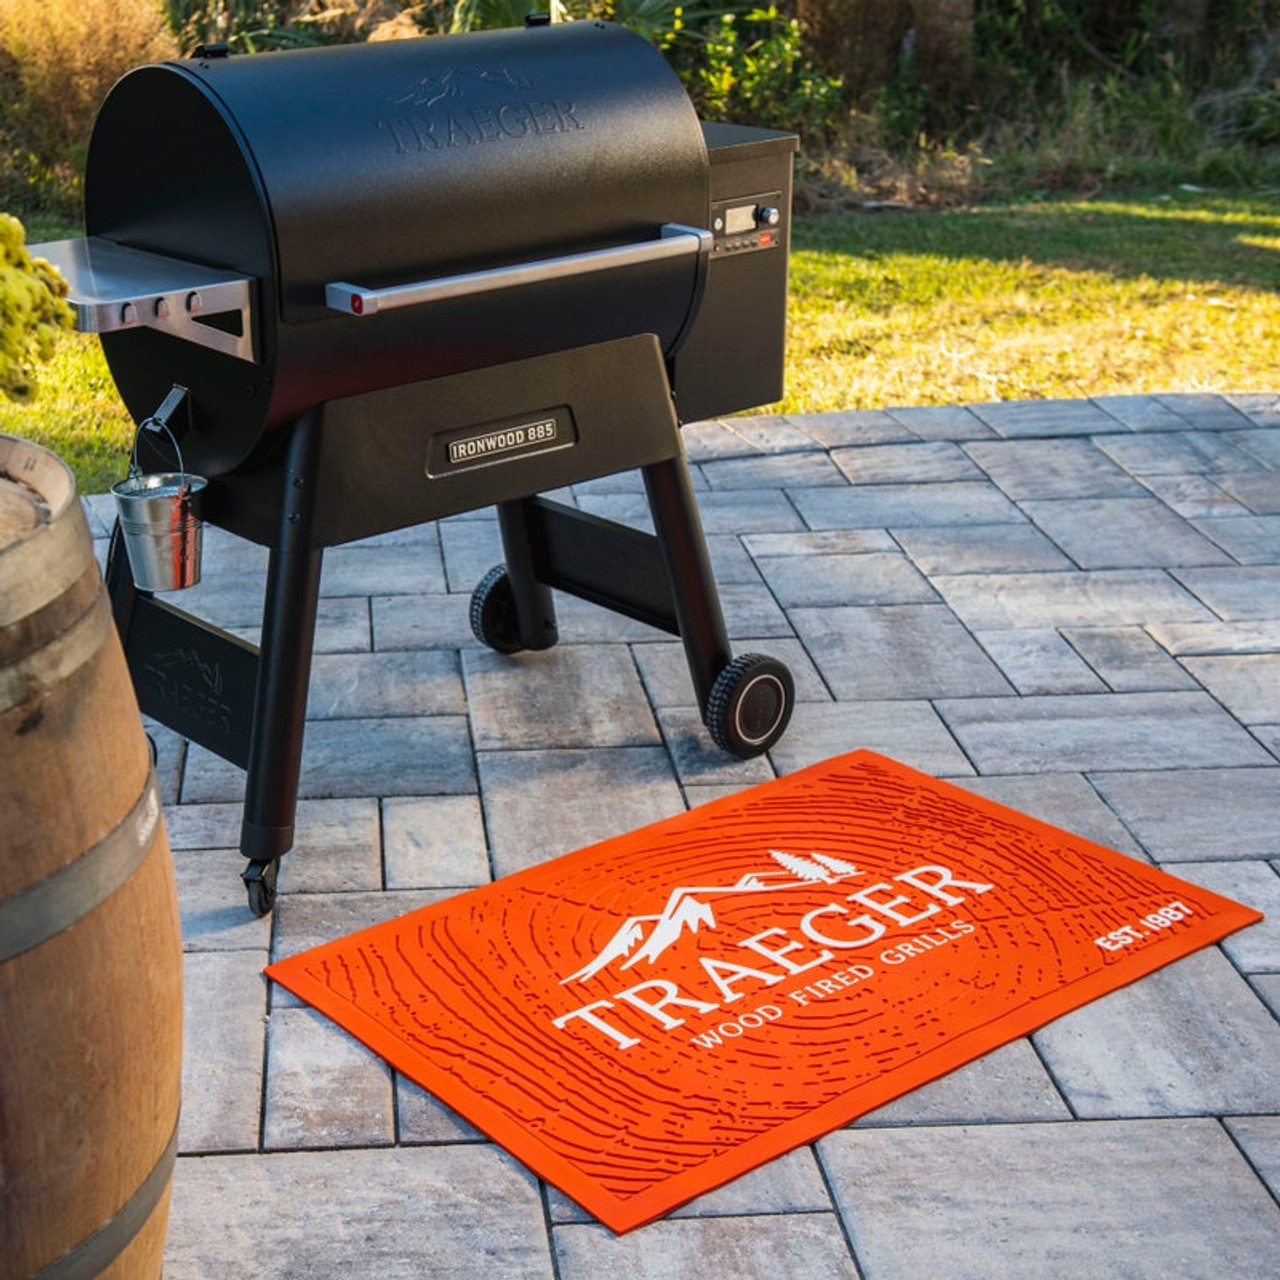 Traeger Grills - BAC386 - 10 INCH CAST GRILL GRATE-BAC386